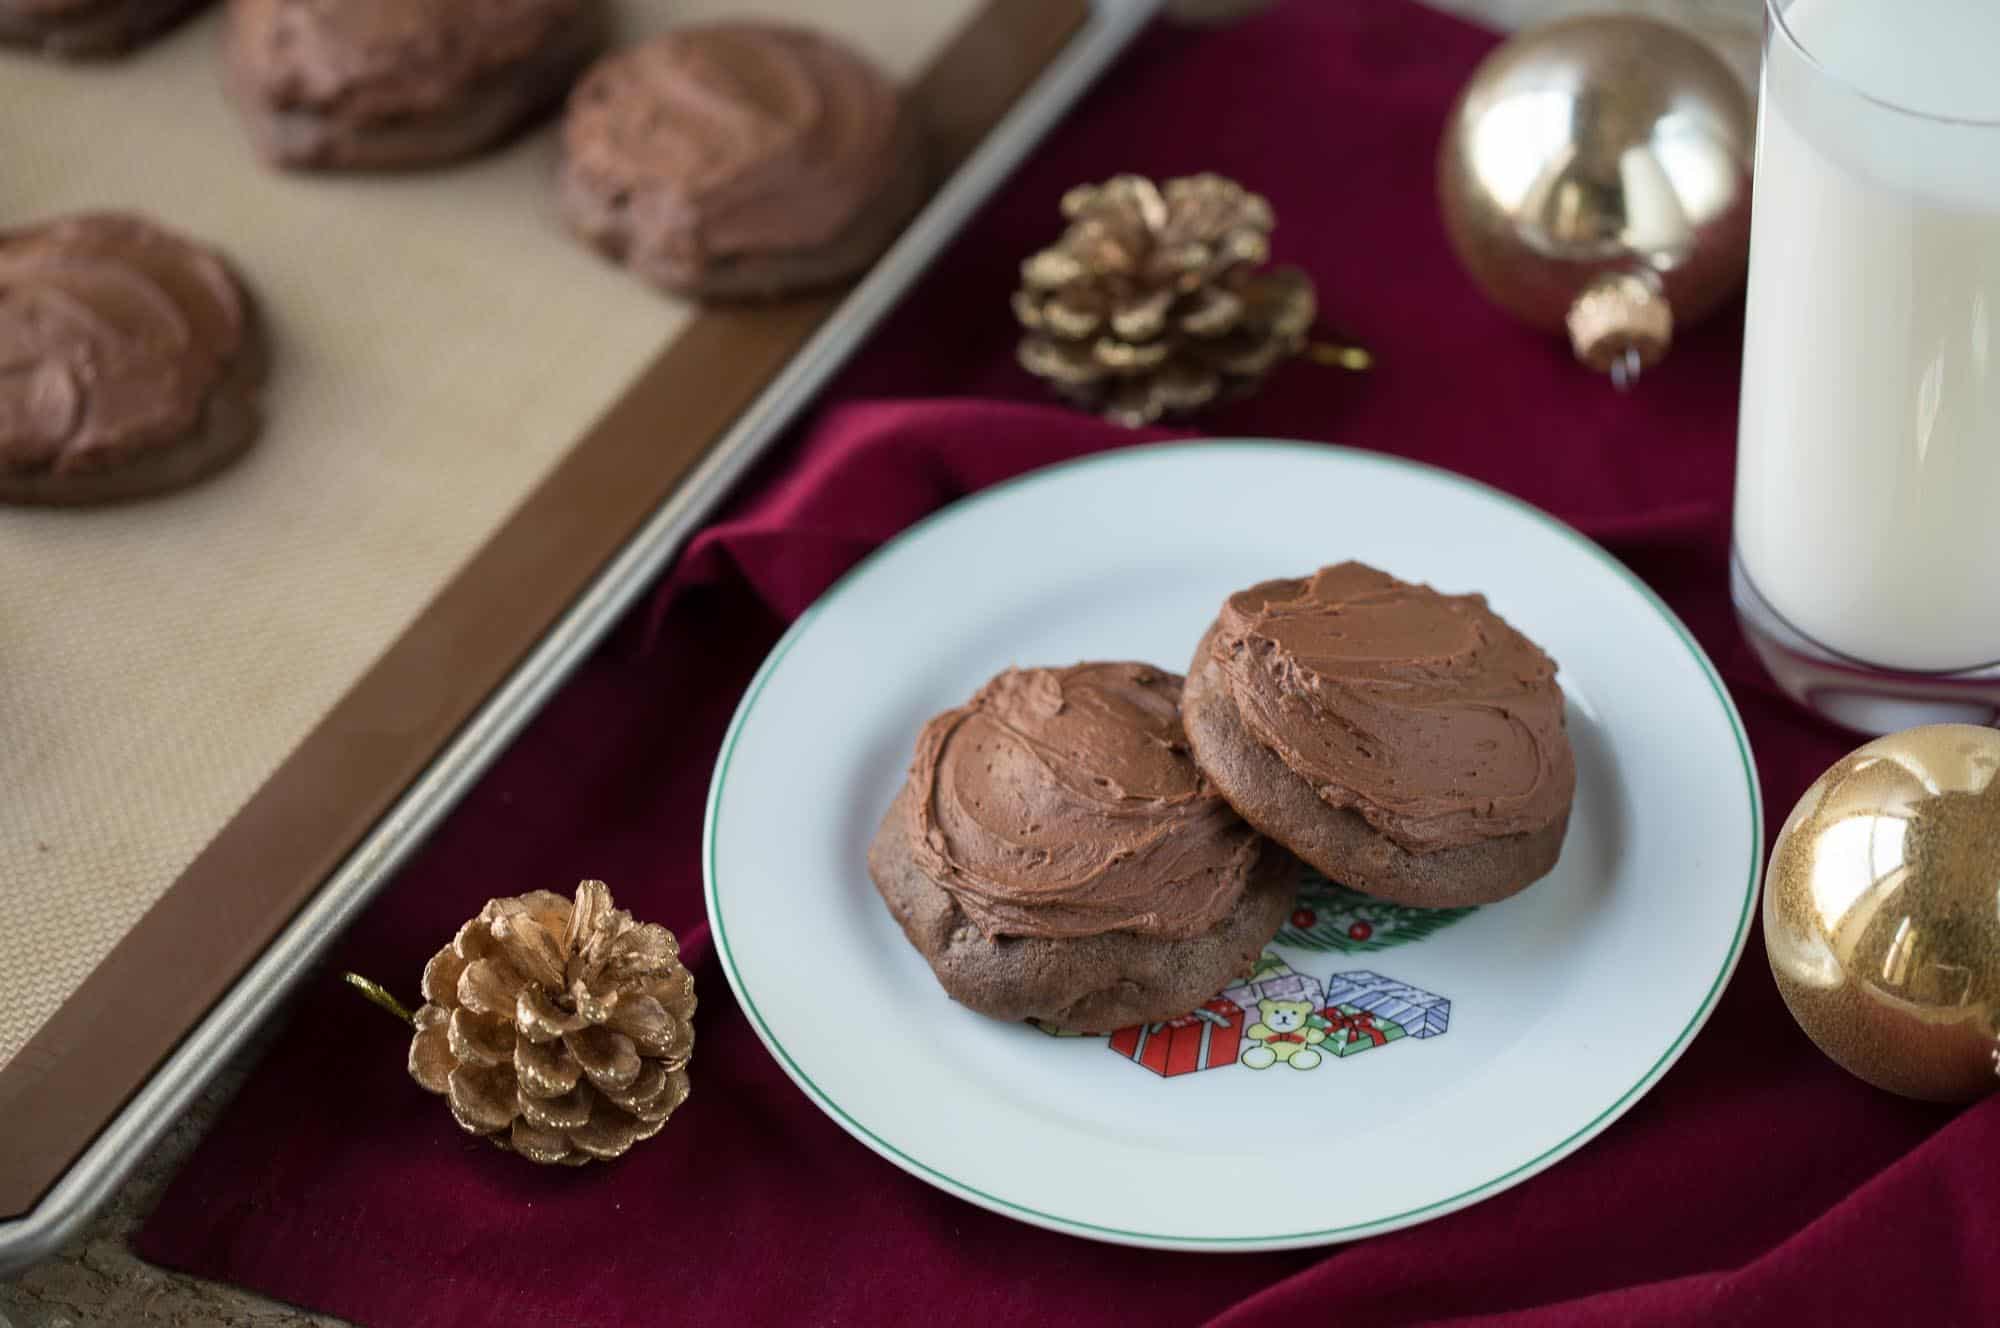 chocolate cookies with chocolate frosting on a white plate surrounded by gold pinecones on a deep red tablecloth.